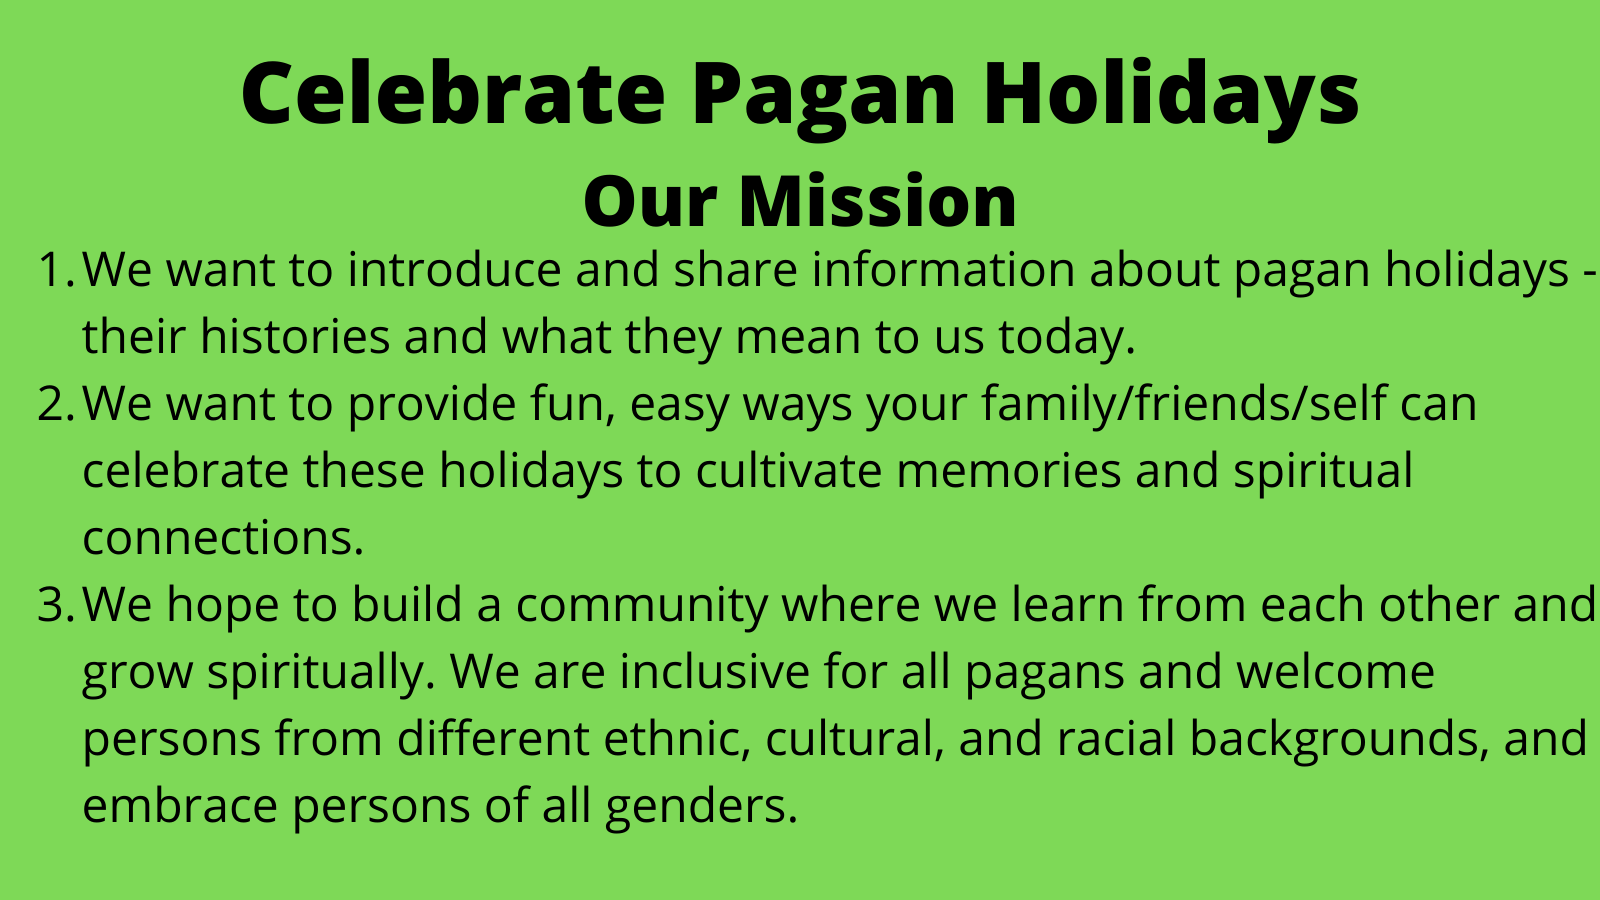 Celebrate Pagan Holidays Our Mission.png